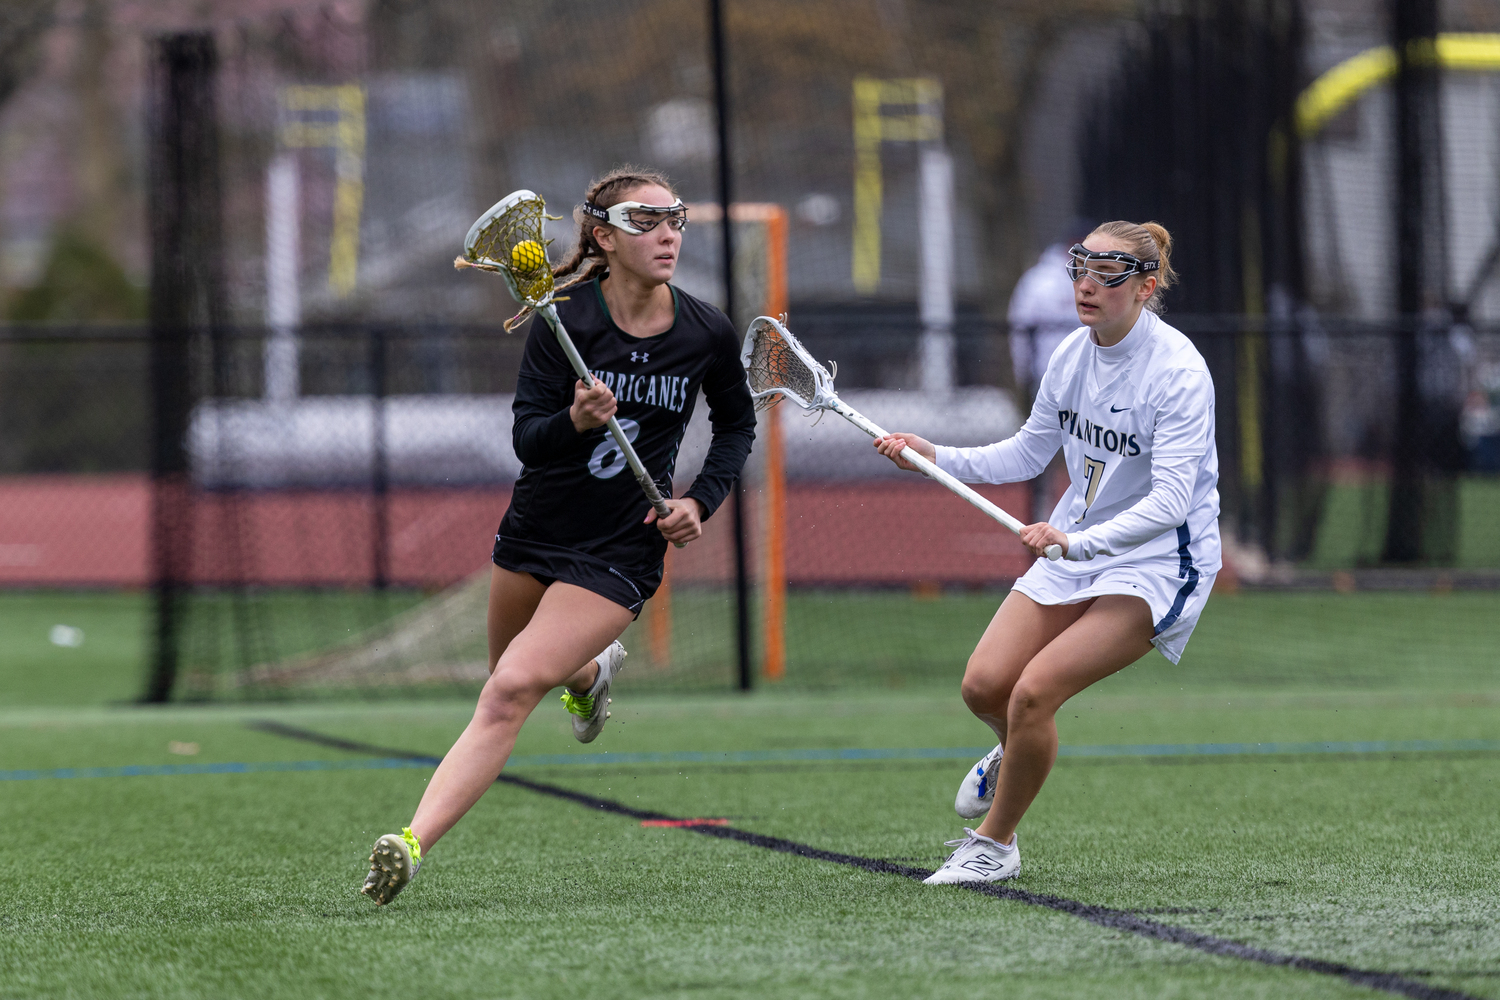 Sophomore attack Ava Derby scored a goal in the game against Bayport-Blue Point. RON ESPOSITO